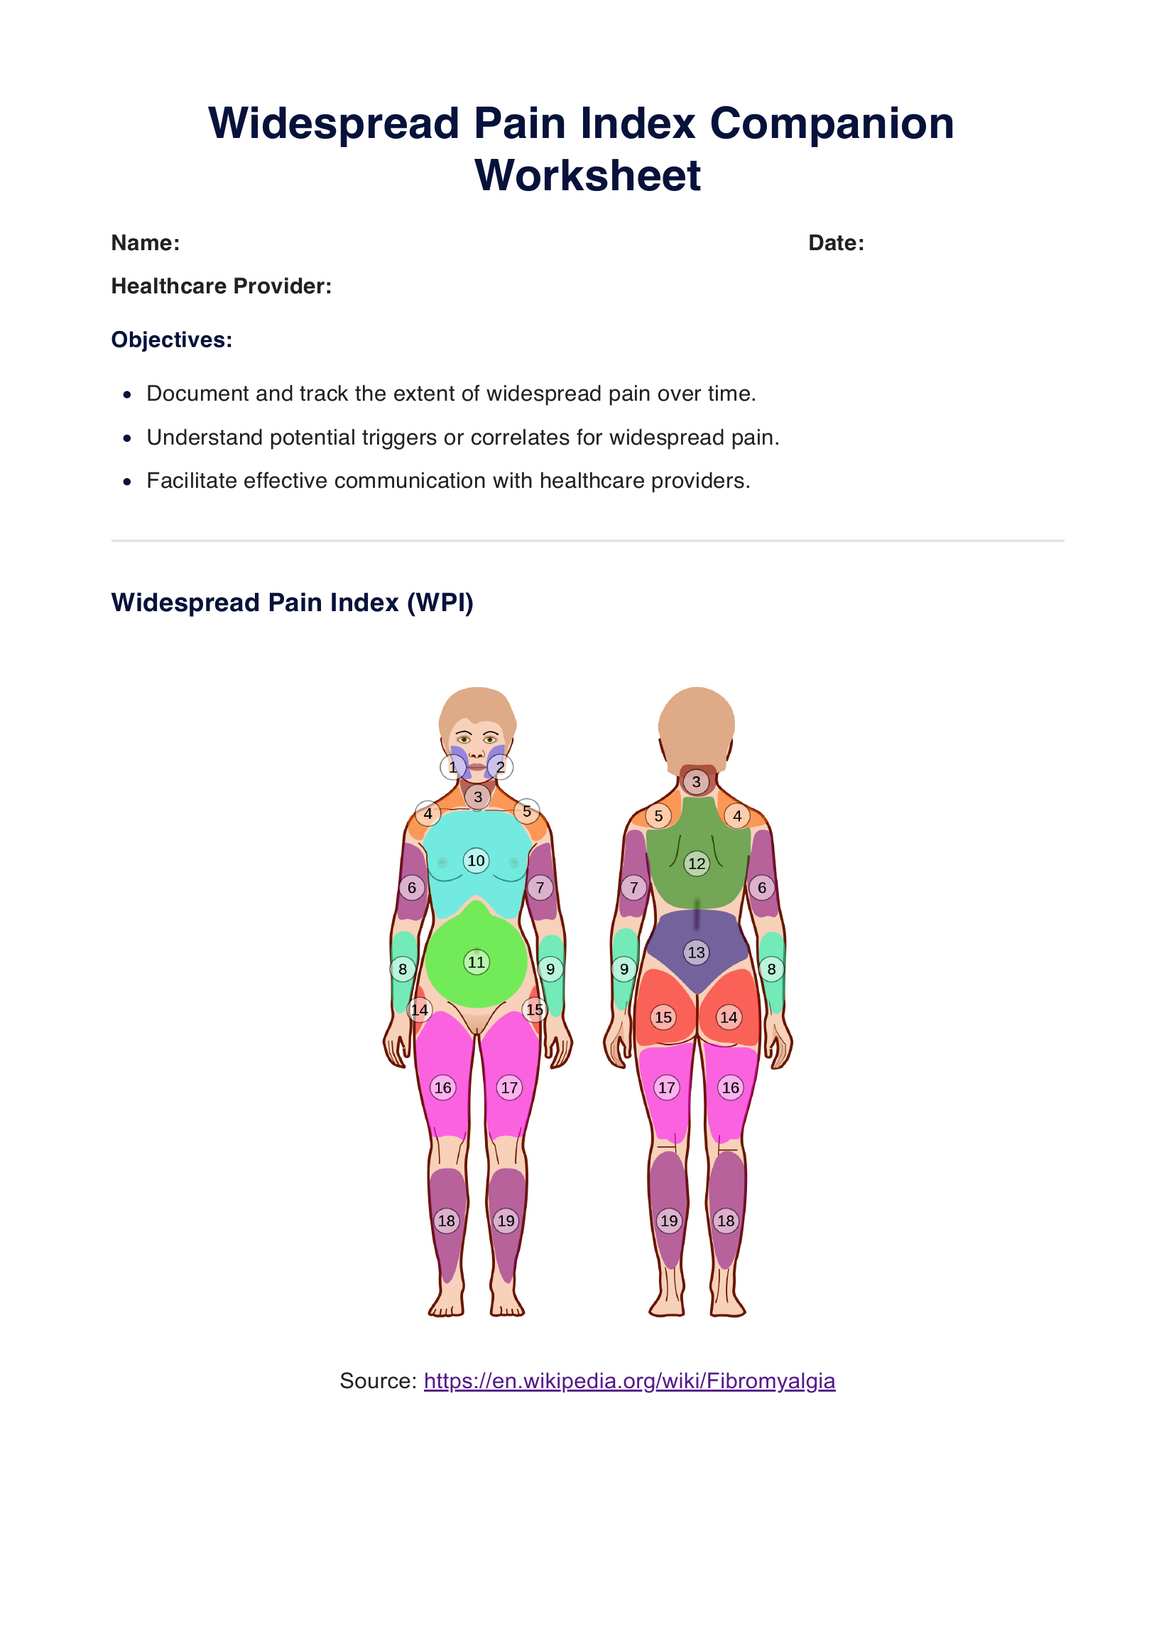 Widespread Pain Index PDF Example